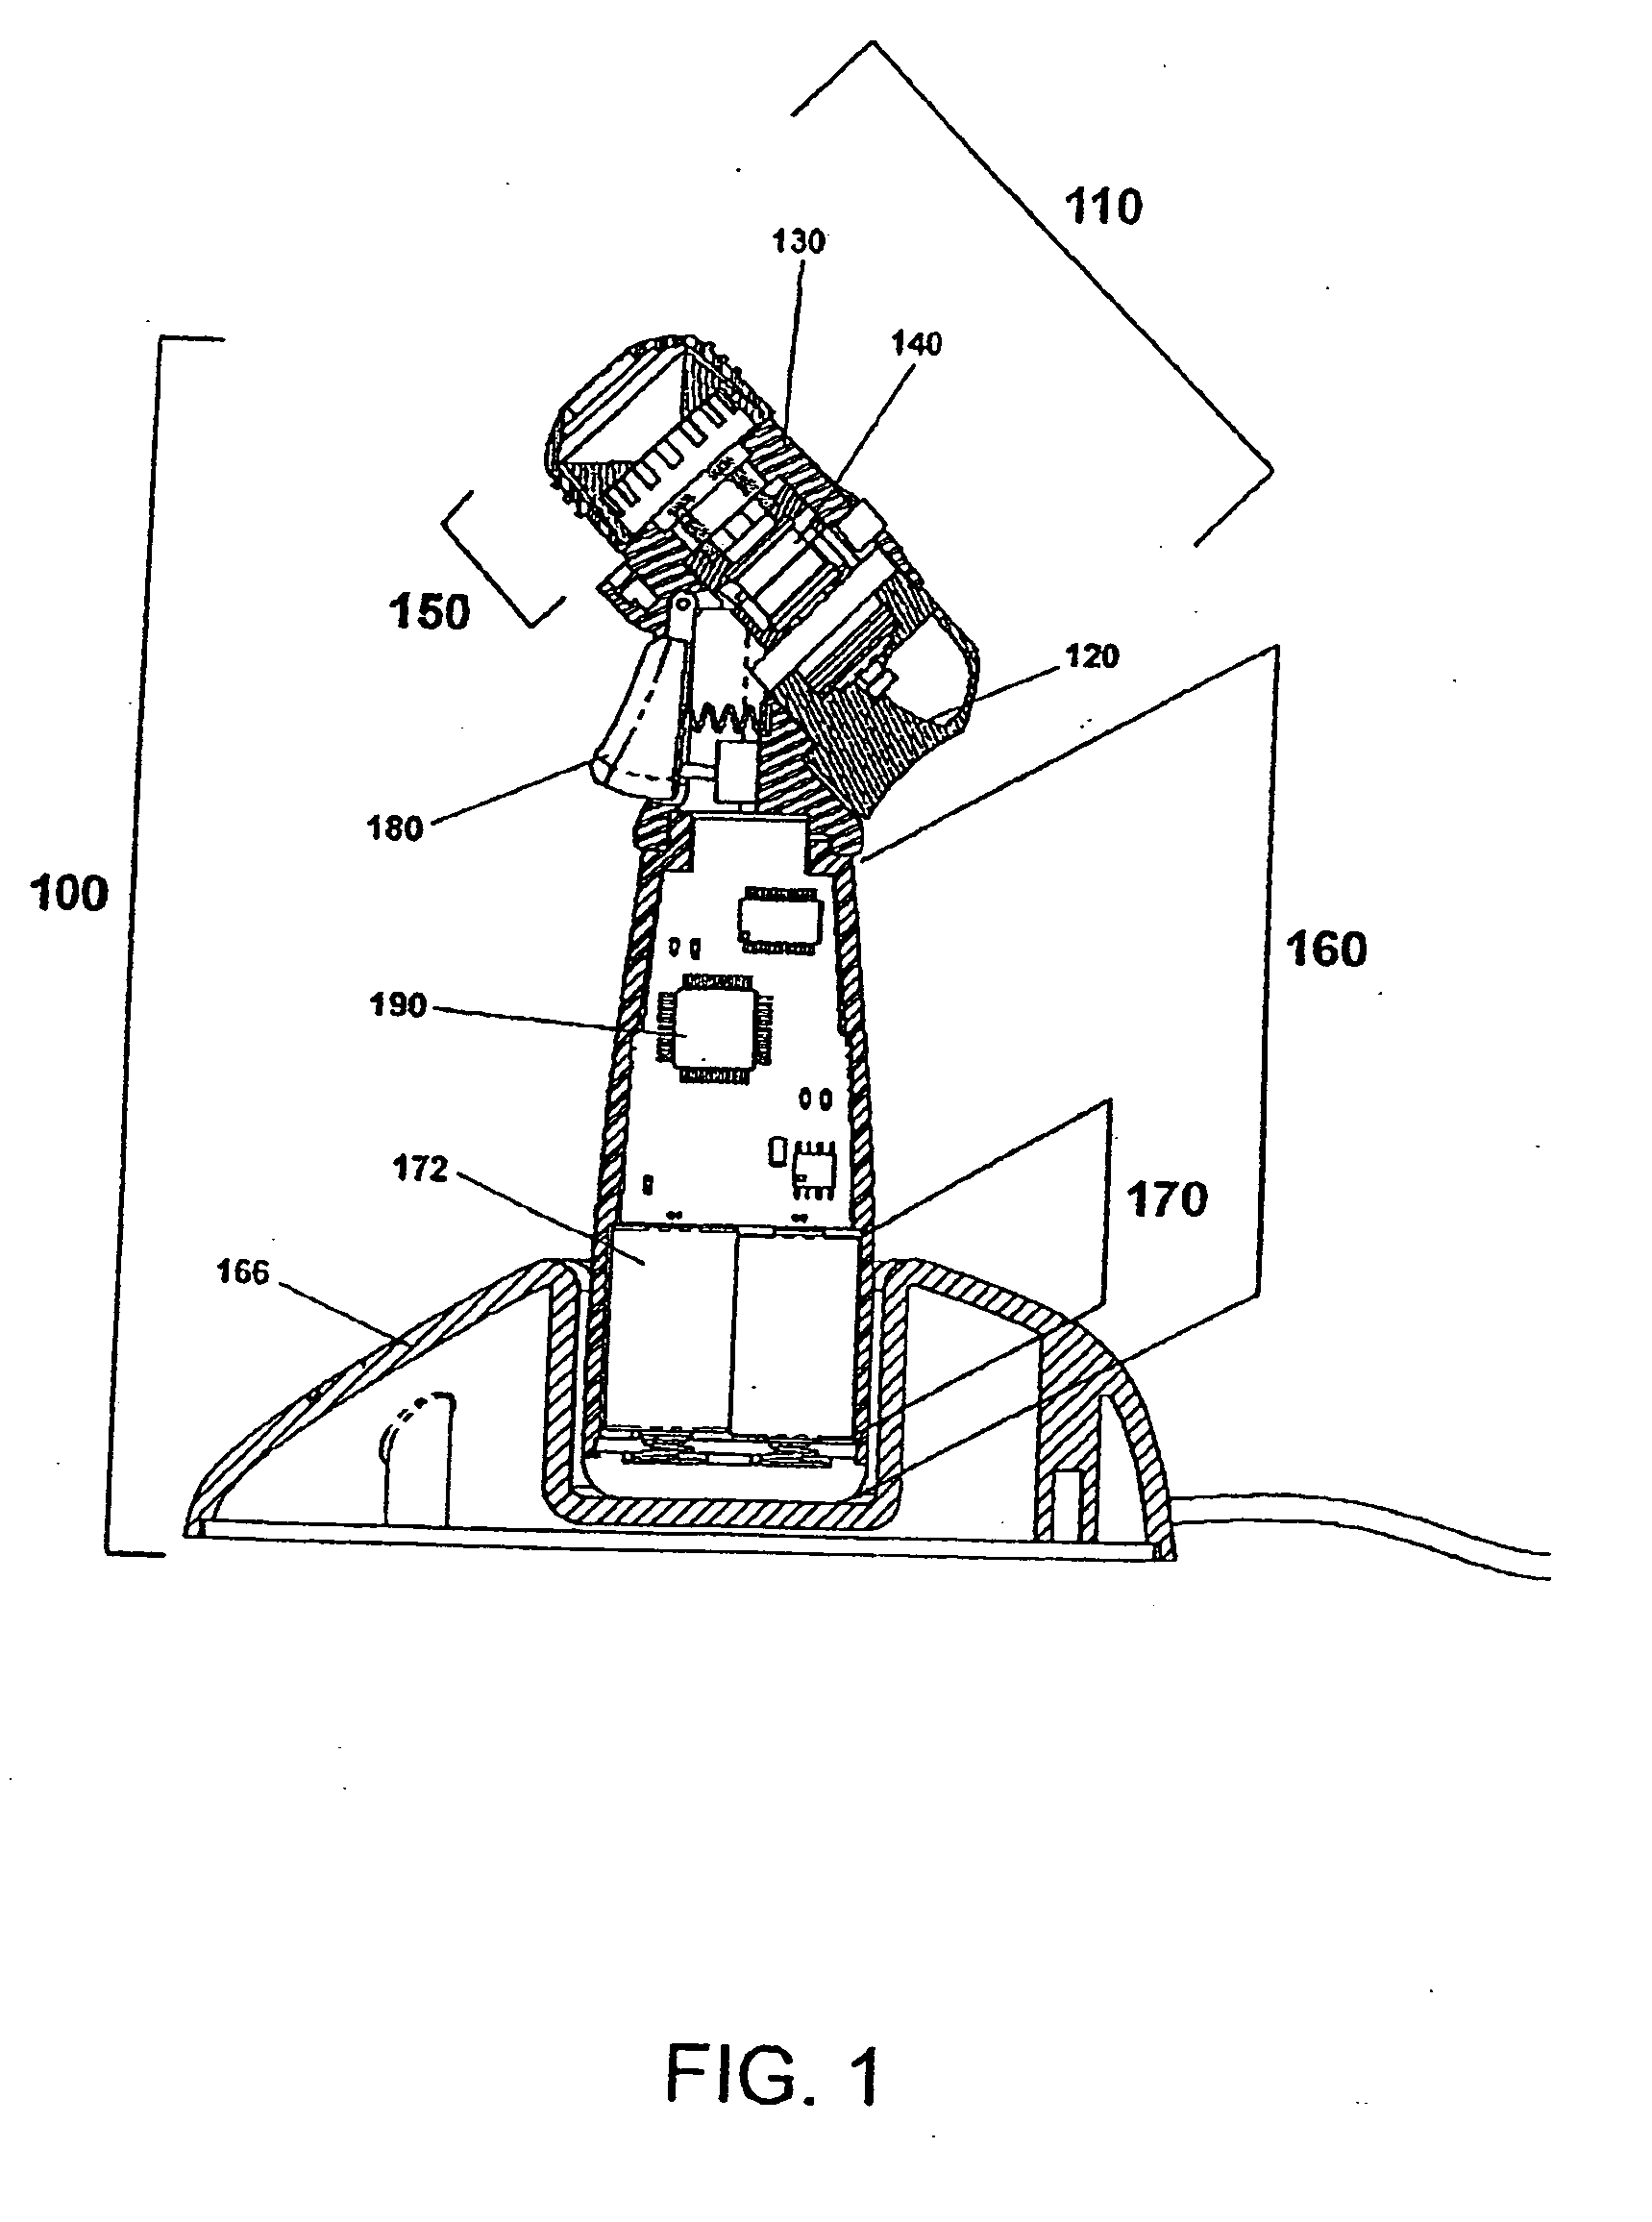 Ophthalmic fluid delivery device and method of operation